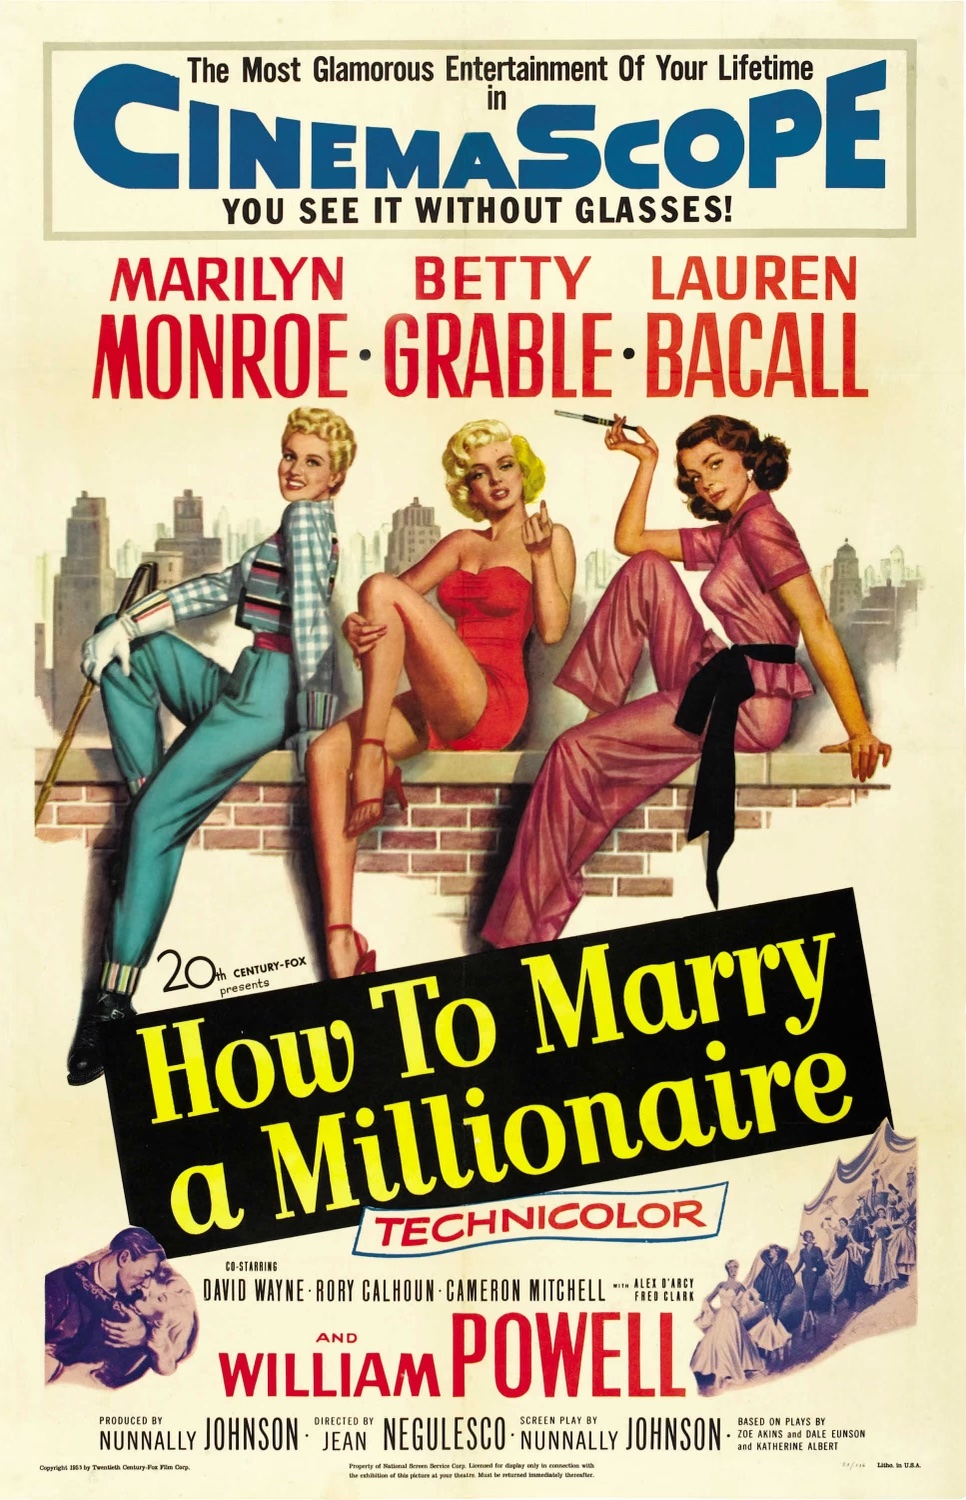 “HOW TO MARRY A MILLIONAIRE” 70TH ANNIVERSARY SCREENING EVENT!